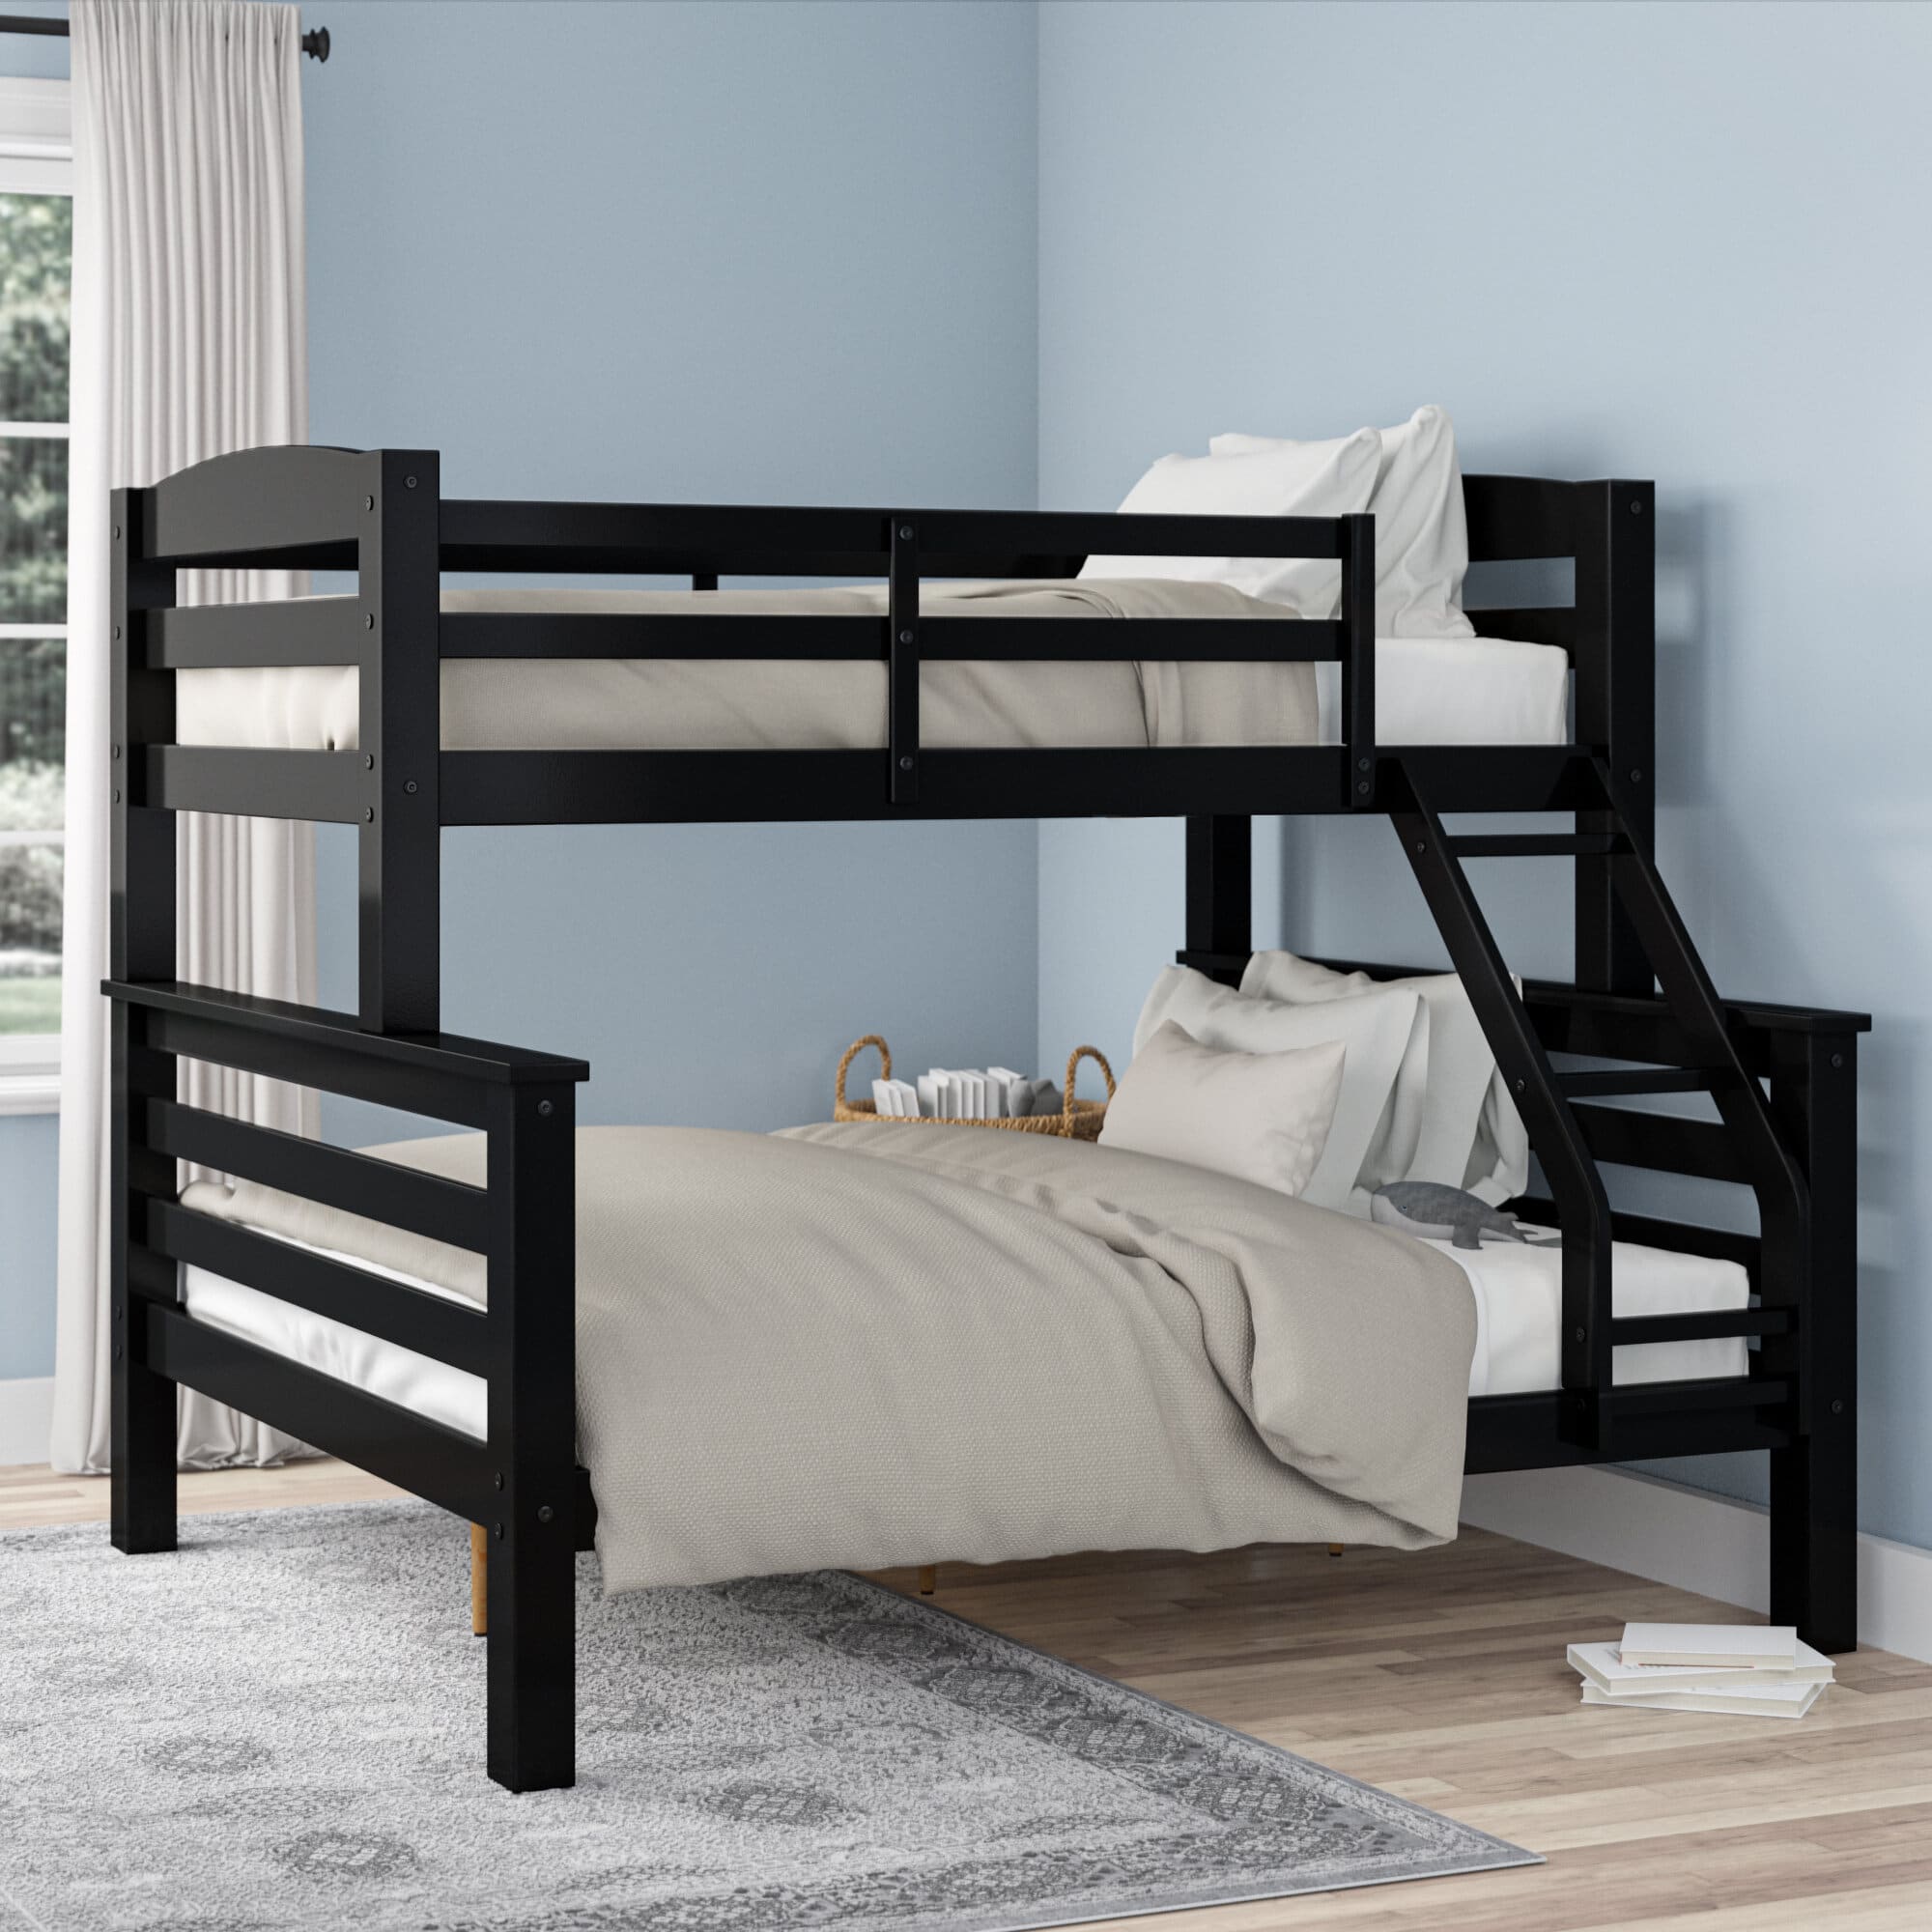 6 Best Twin Over Full Bunk Beds May, Full Bunk Beds